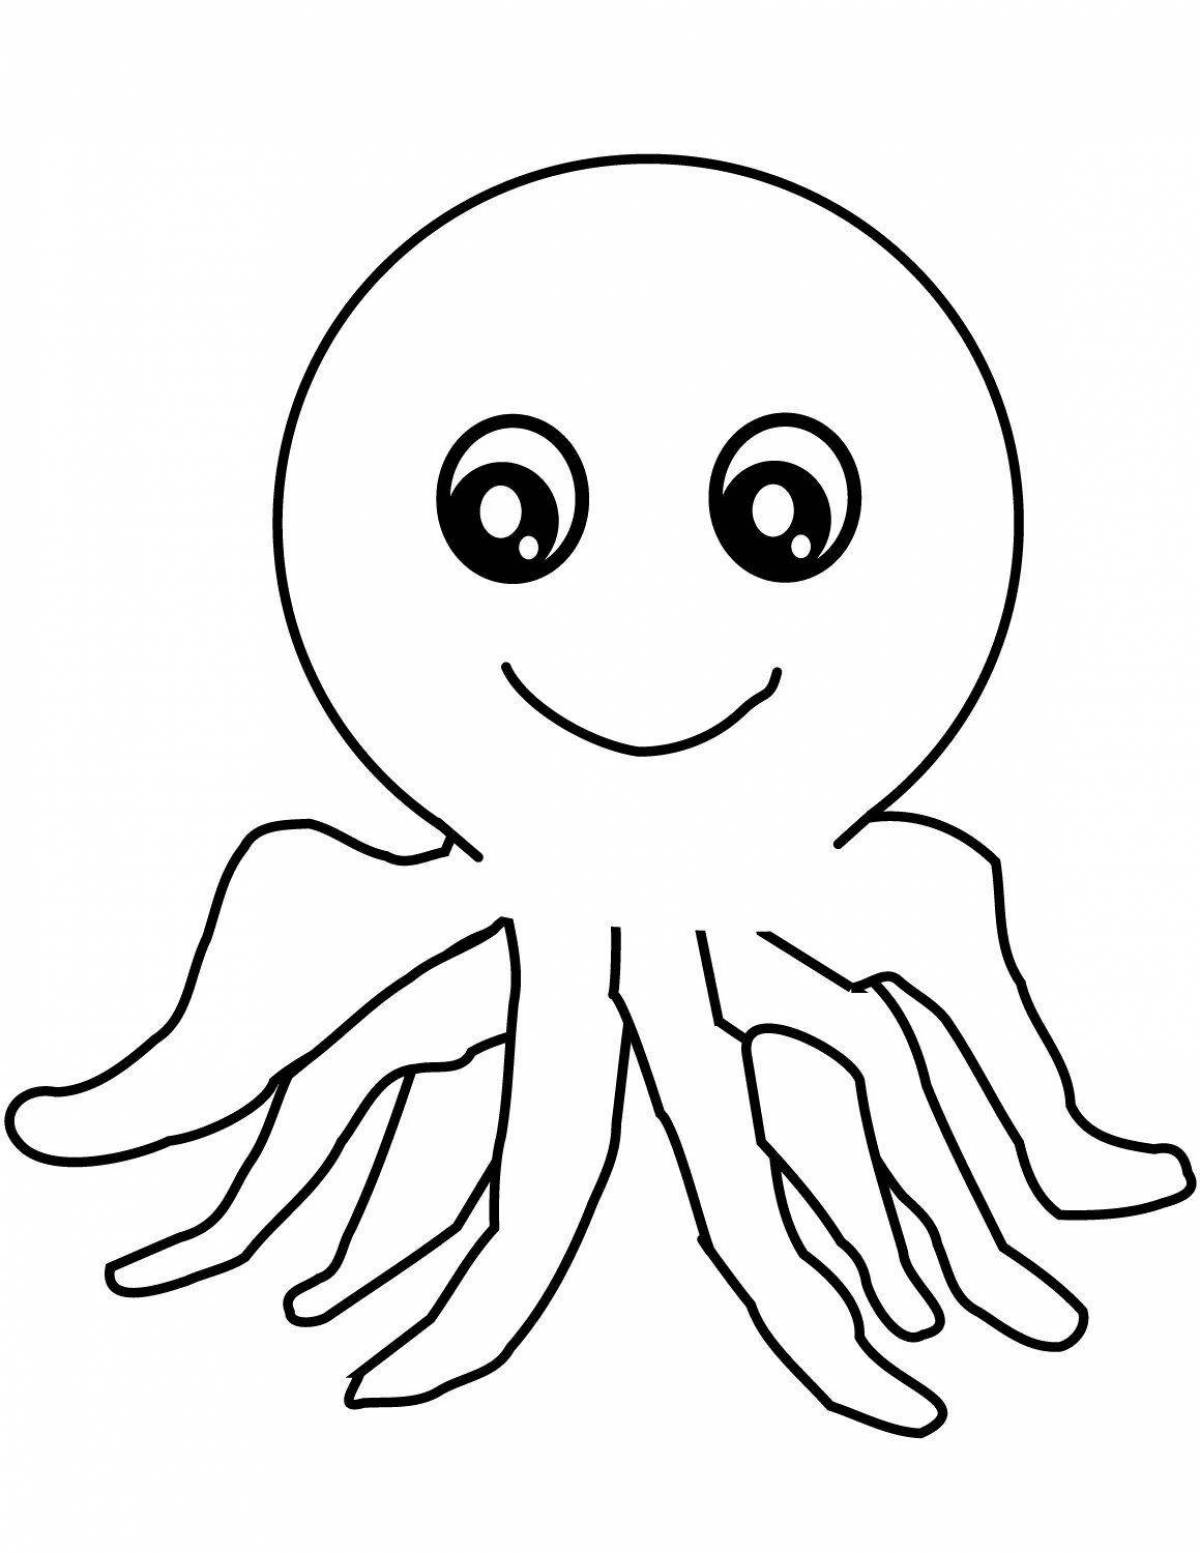 A wonderful octopus coloring for children